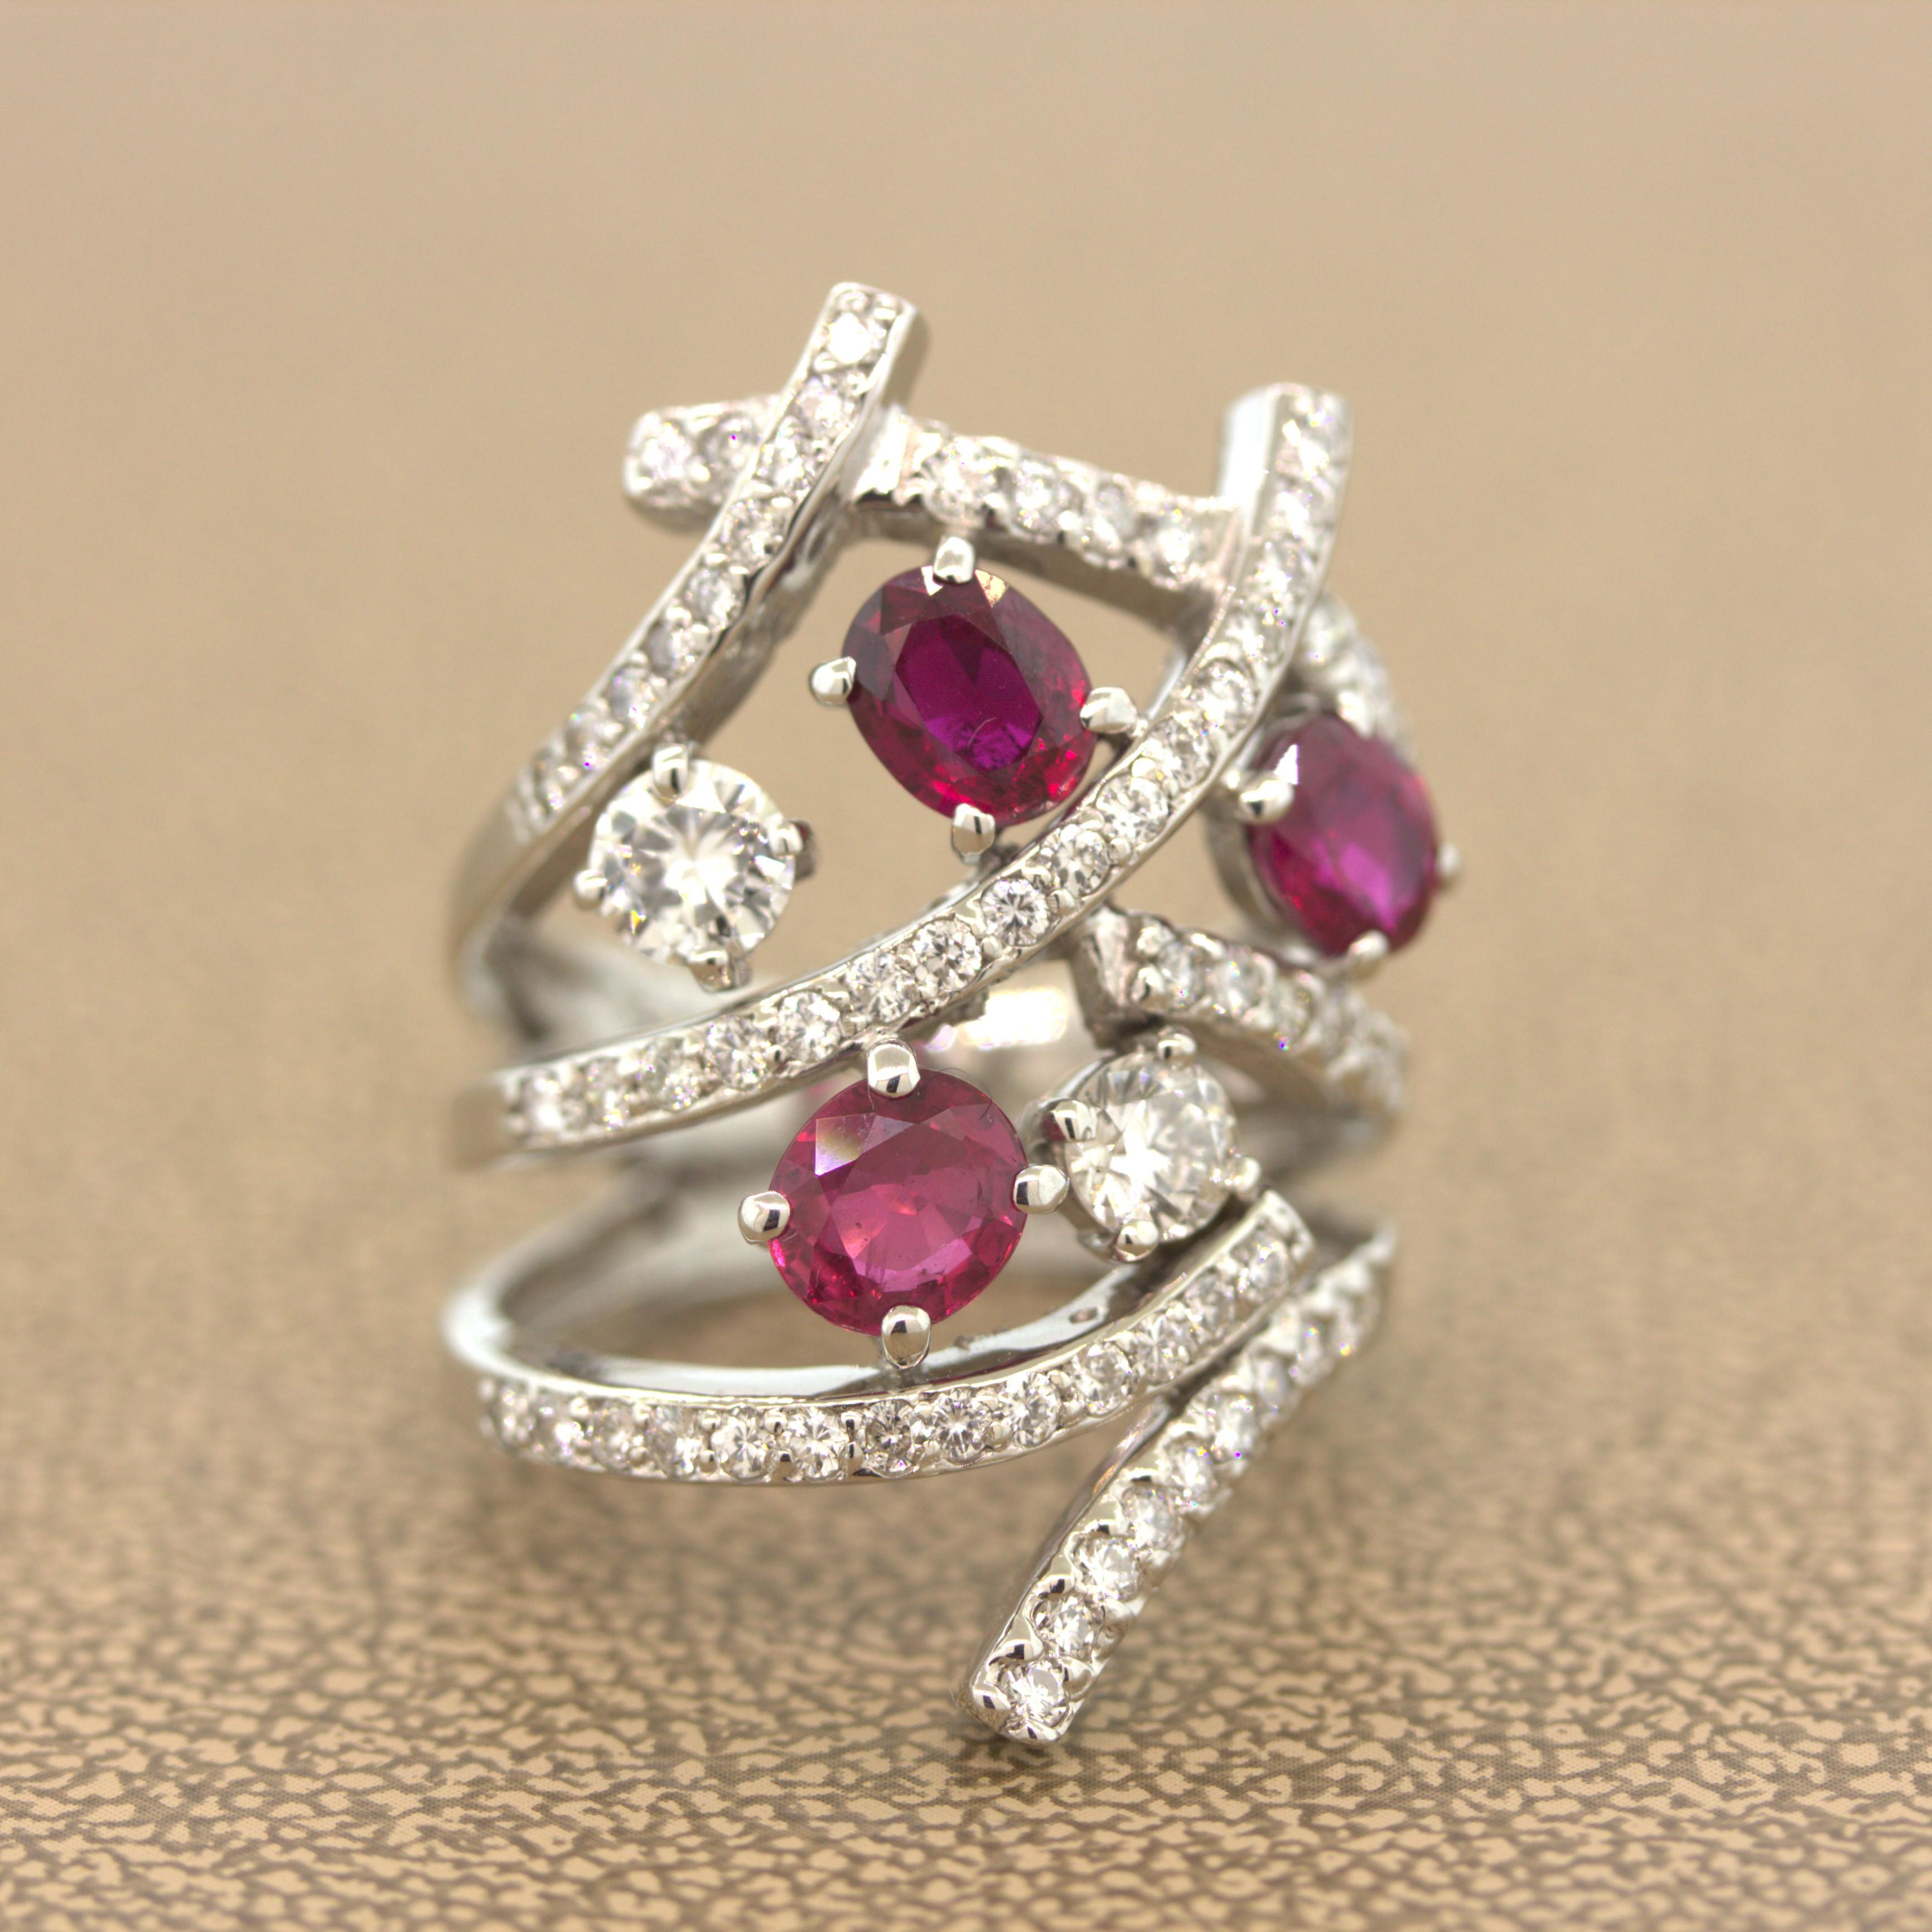 A modern take on the classic bypass ring, this lovely piece features 3 vivid red oval shape rubies weighing a total of 2.21 carats. They are excellent color and clarity and are accented by cascade of diamonds, which include two larger round diamonds